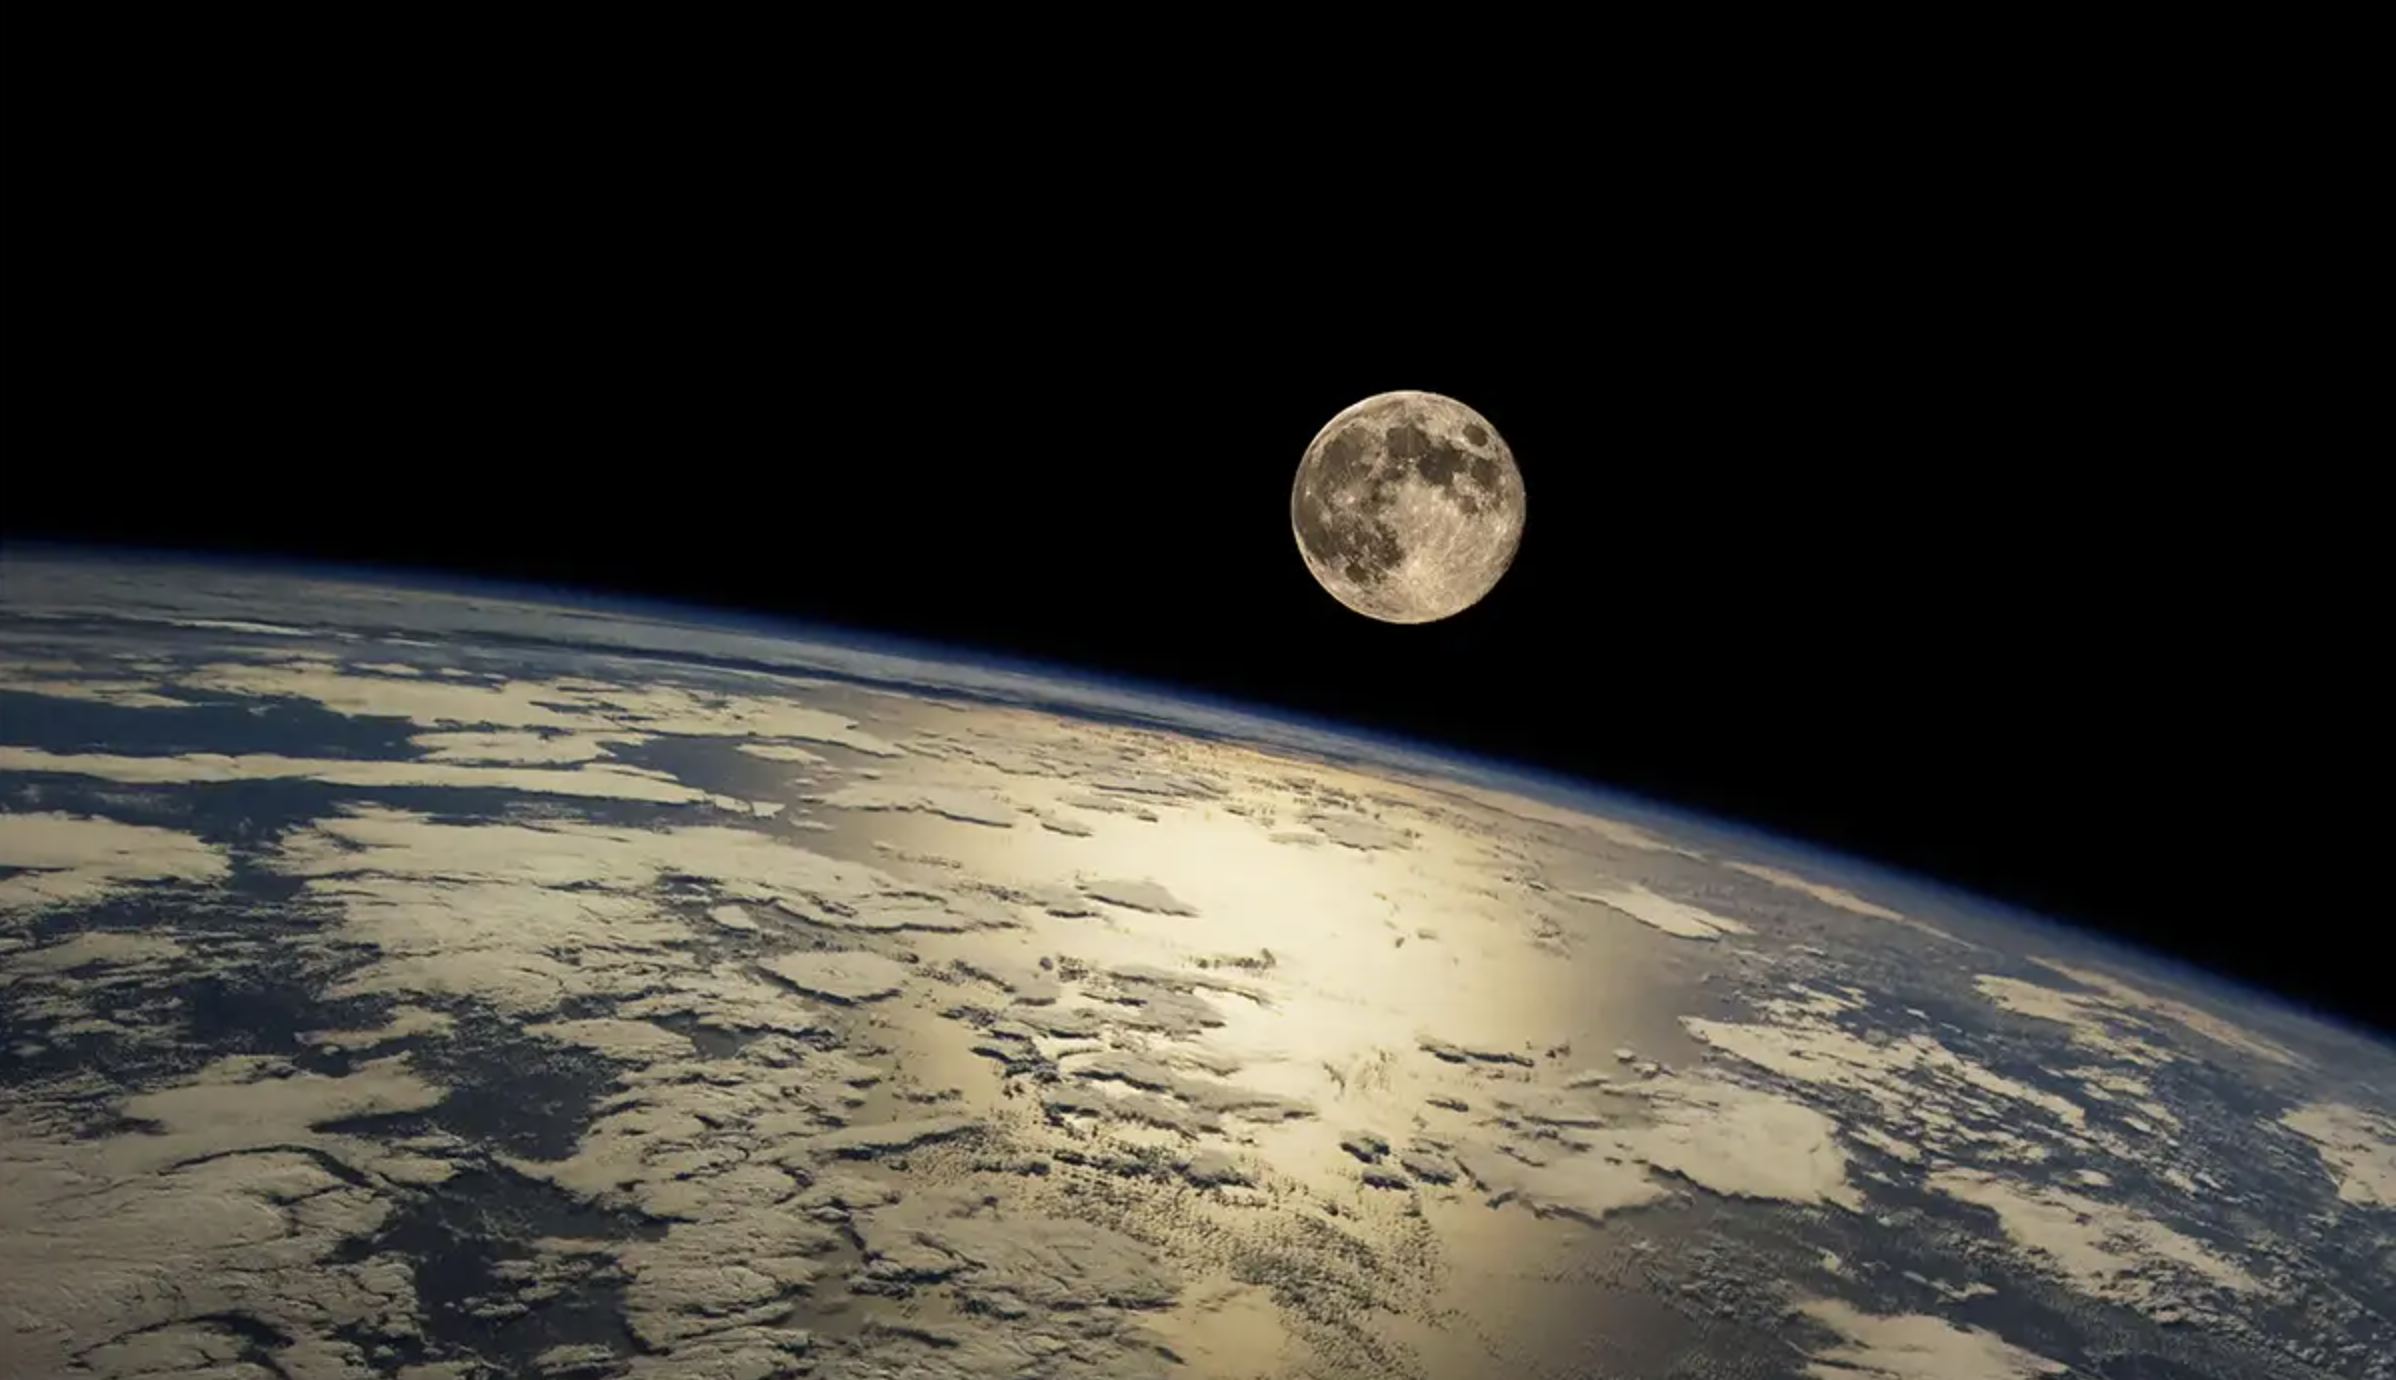 A view of the Earth and the Moon